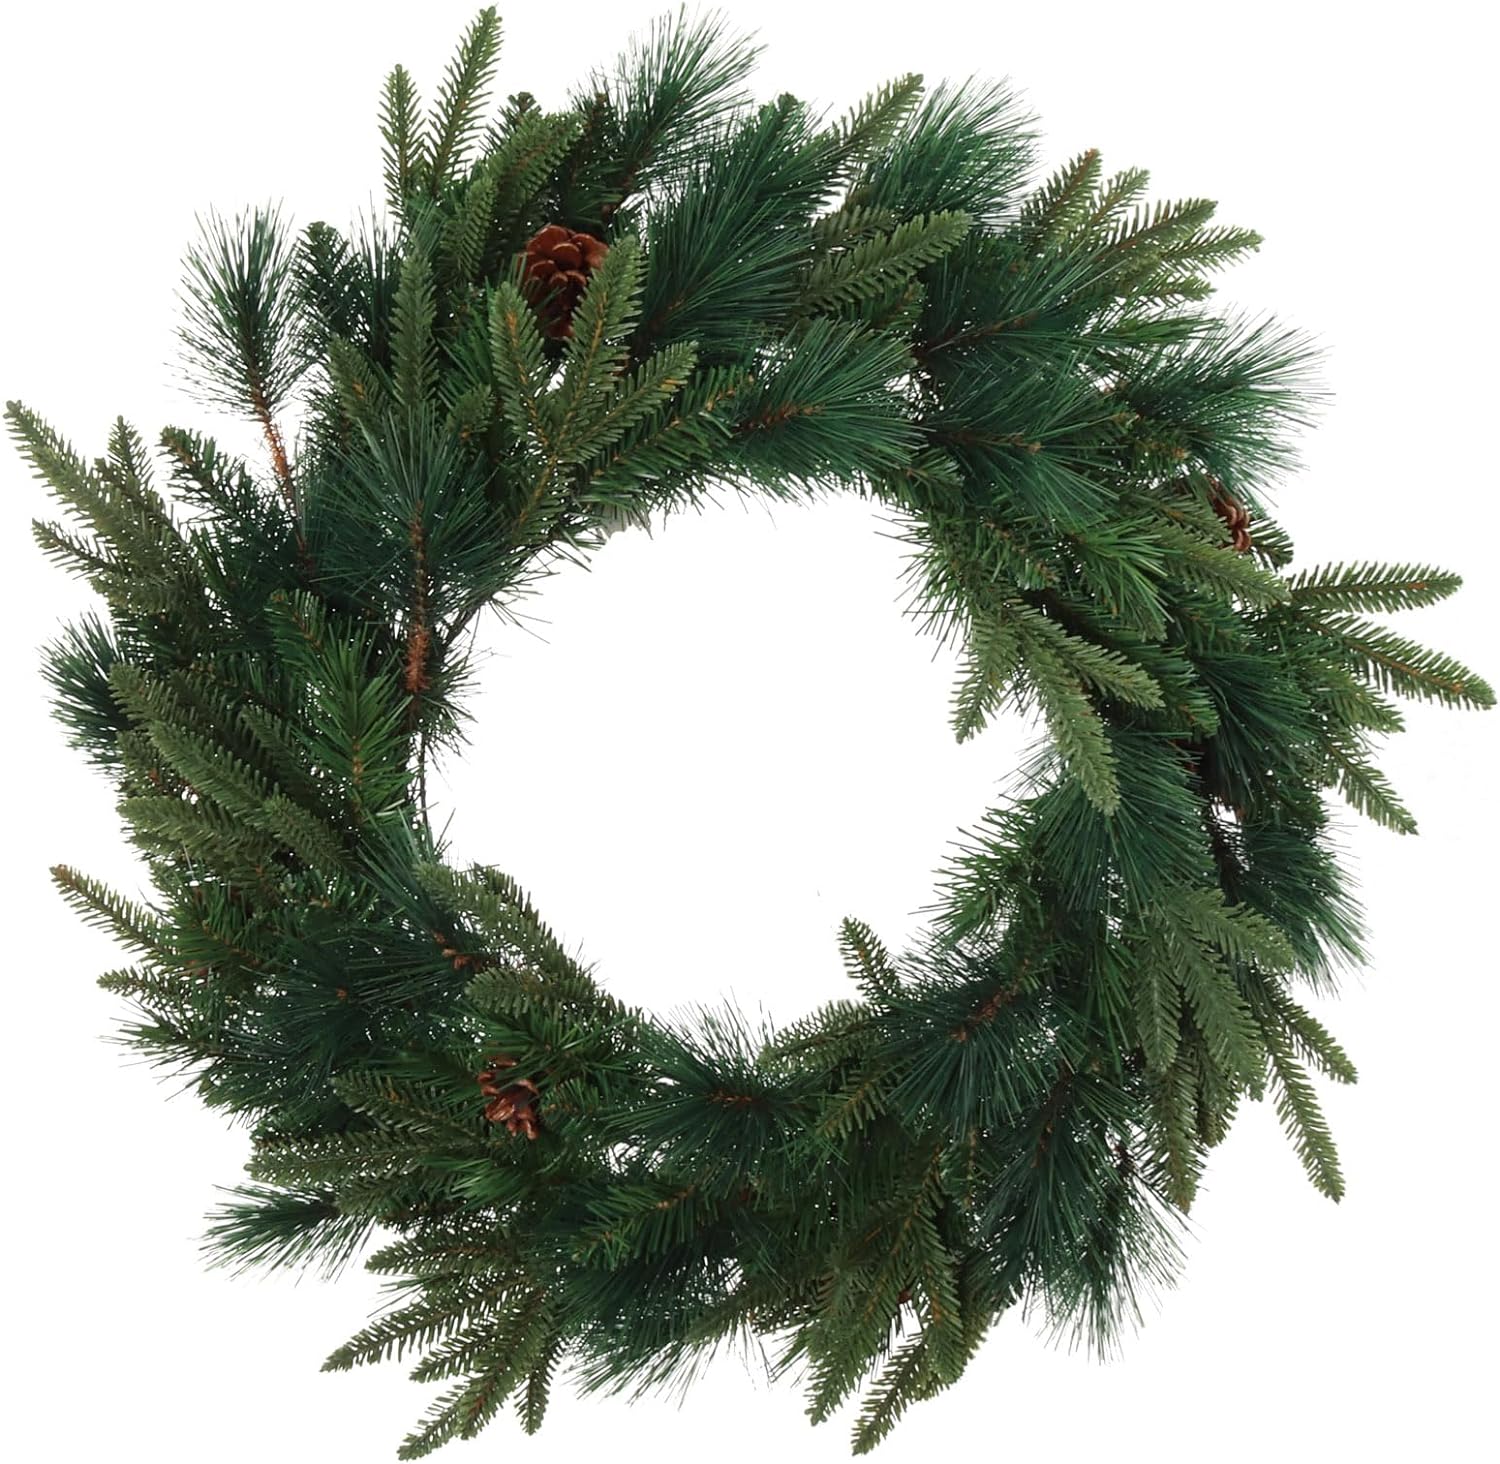 24" Rustic Pine Wreath with Natural Cones - Charming Artificial Home Decor